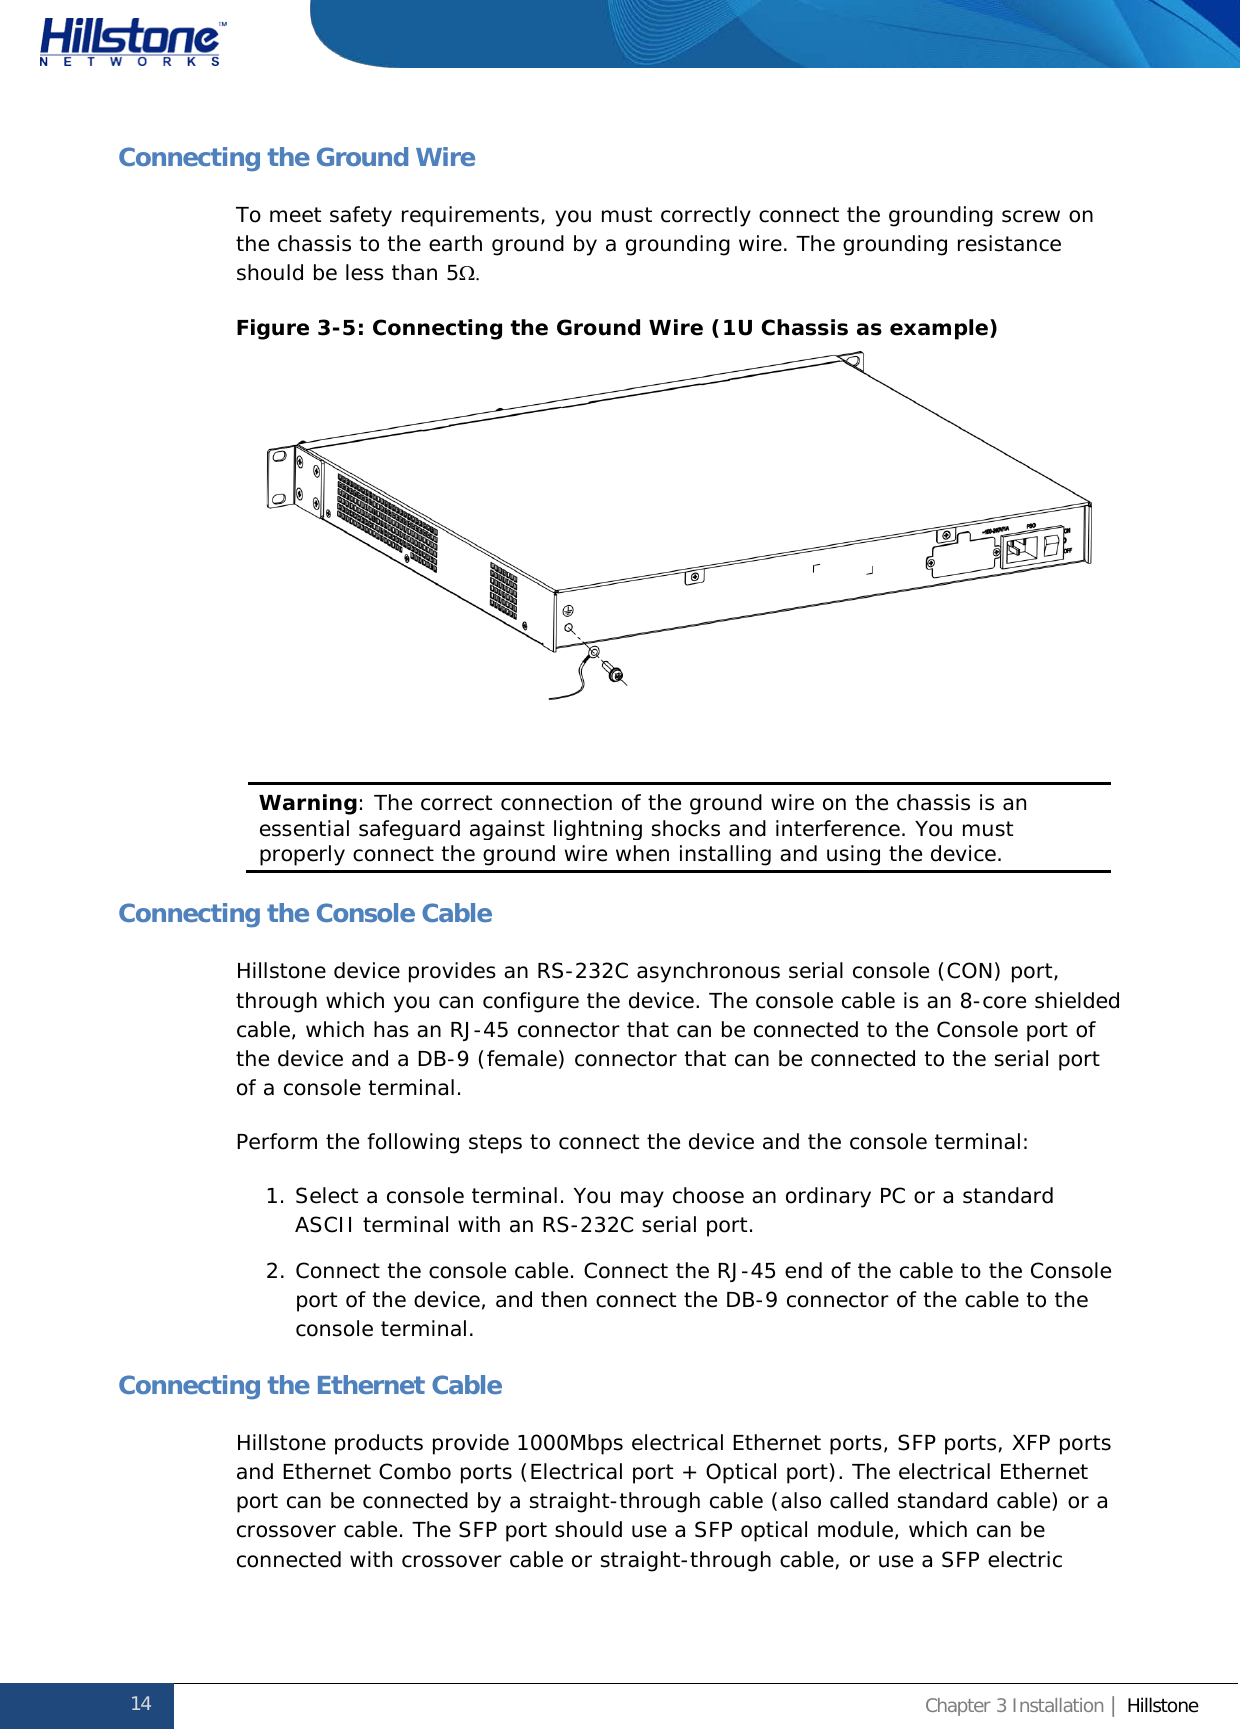              Hillstone  Hardware Reference Guide Connecting the Ground Wire To meet safety requirements, you must correctly connect the grounding screw on the chassis to the earth ground by a grounding wire. The grounding resistance should be less than 5Ω.  Figure 3-5: Connecting the Ground Wire (1U Chassis as example)   Warning: The correct connection of the ground wire on the chassis is an essential safeguard against lightning shocks and interference. You must properly connect the ground wire when installing and using the device.  Connecting the Console Cable Hillstone device provides an RS-232C asynchronous serial console (CON) port, through which you can configure the device. The console cable is an 8-core shielded cable, which has an RJ-45 connector that can be connected to the Console port of the device and a DB-9 (female) connector that can be connected to the serial port of a console terminal. Perform the following steps to connect the device and the console terminal: 1. Select a console terminal. You may choose an ordinary PC or a standard ASCII terminal with an RS-232C serial port. 2. Connect the console cable. Connect the RJ-45 end of the cable to the Console port of the device, and then connect the DB-9 connector of the cable to the console terminal. Connecting the Ethernet Cable Hillstone products provide 1000Mbps electrical Ethernet ports, SFP ports, XFP ports and Ethernet Combo ports (Electrical port + Optical port). The electrical Ethernet port can be connected by a straight-through cable (also called standard cable) or a crossover cable. The SFP port should use a SFP optical module, which can be connected with crossover cable or straight-through cable, or use a SFP electric 14 Chapter 3 Installation | Hillstone  